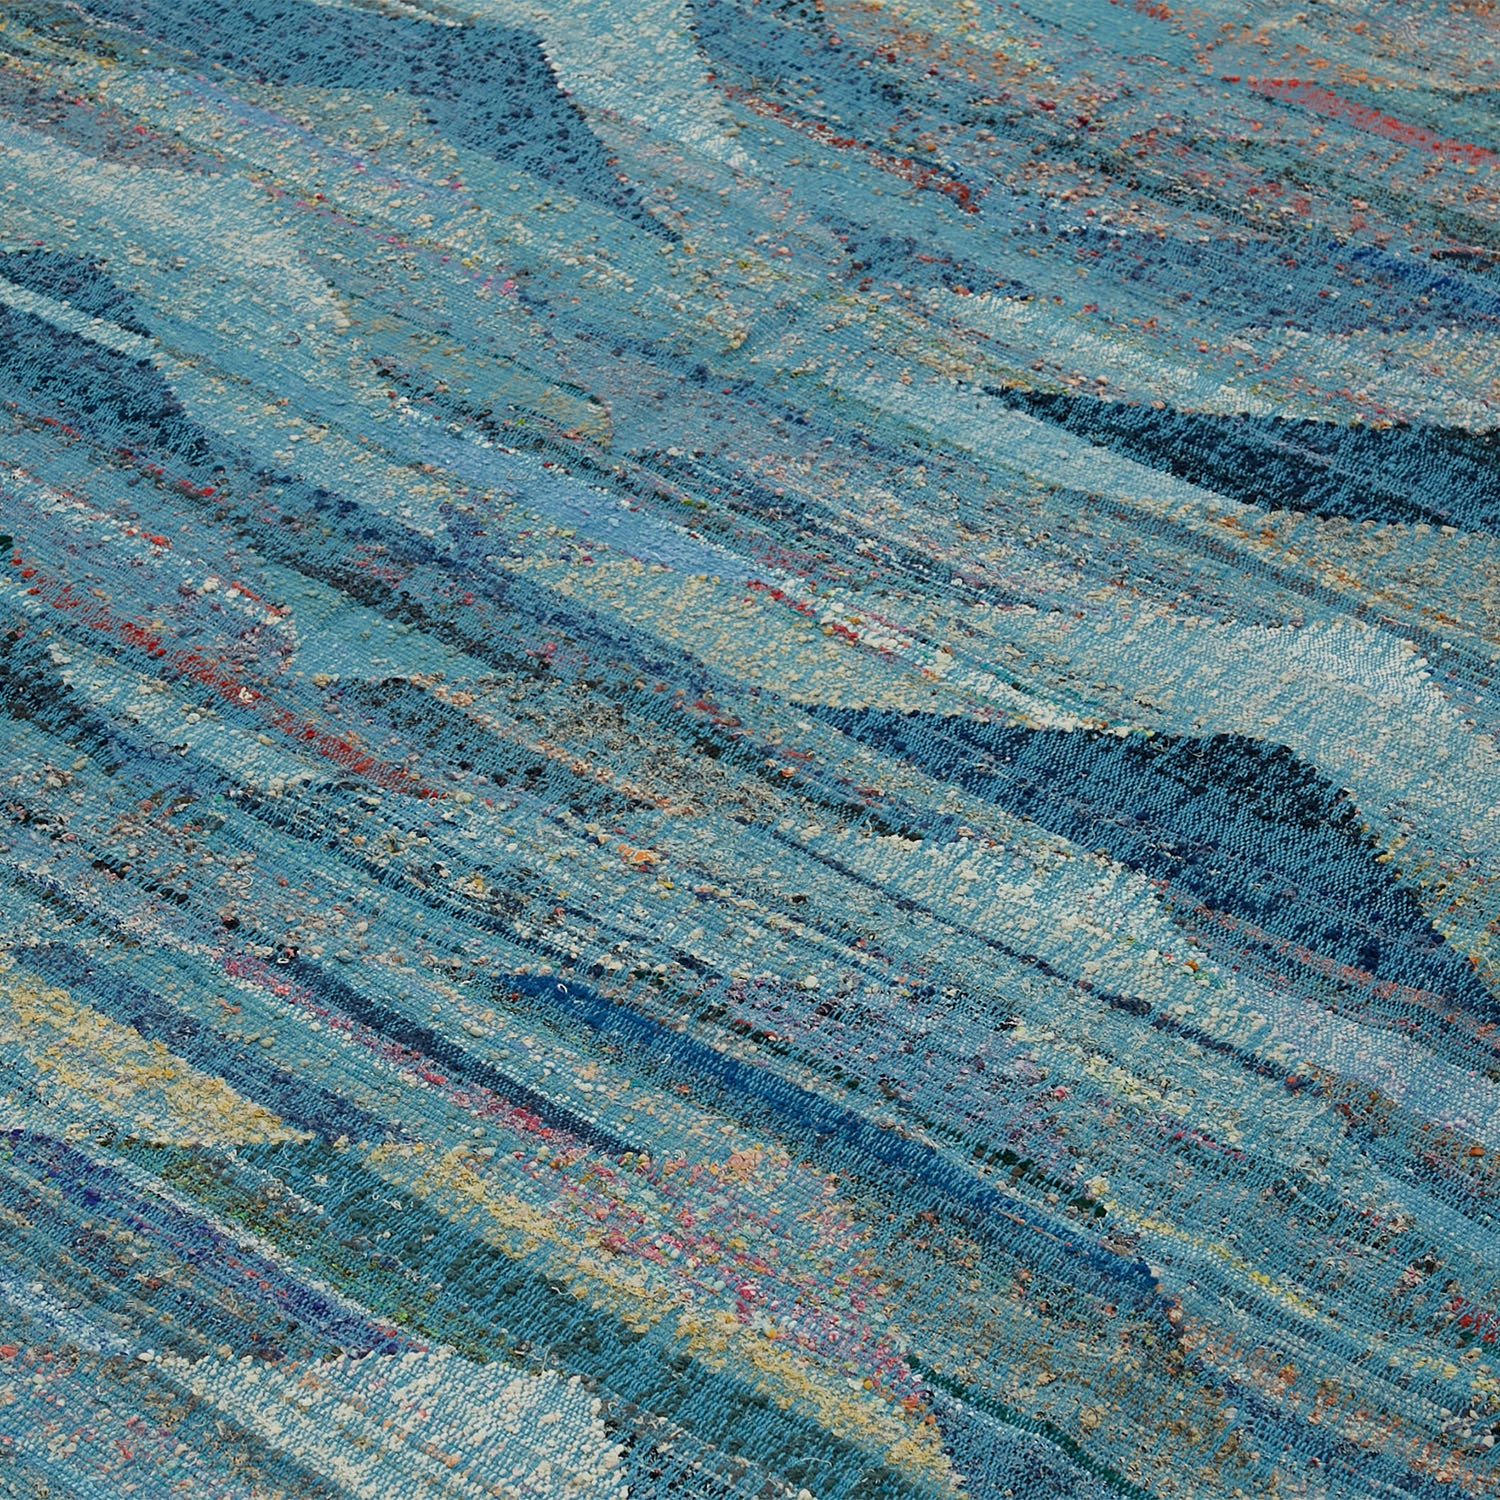 Close-up of a textured blue fabric with streaks of color.